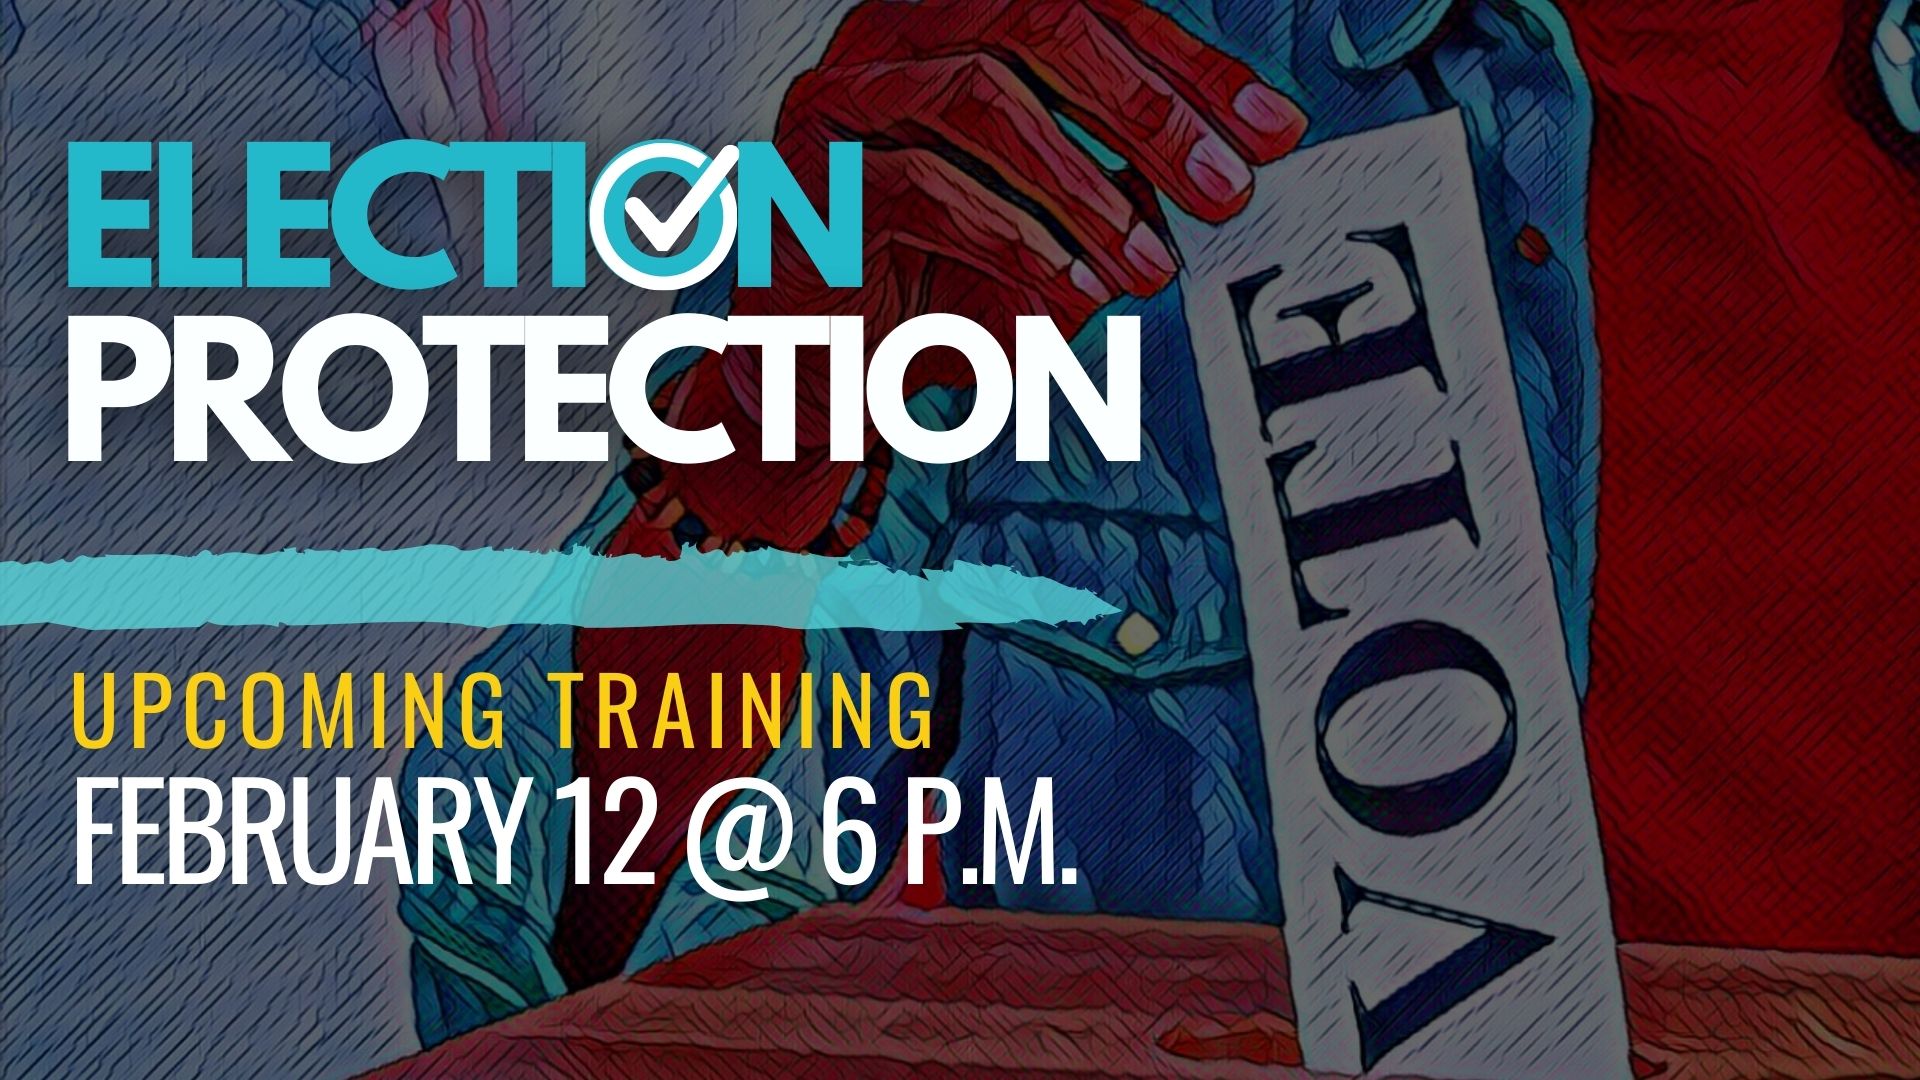 Election Protection training on February 12 at 6 p.m. via zoom